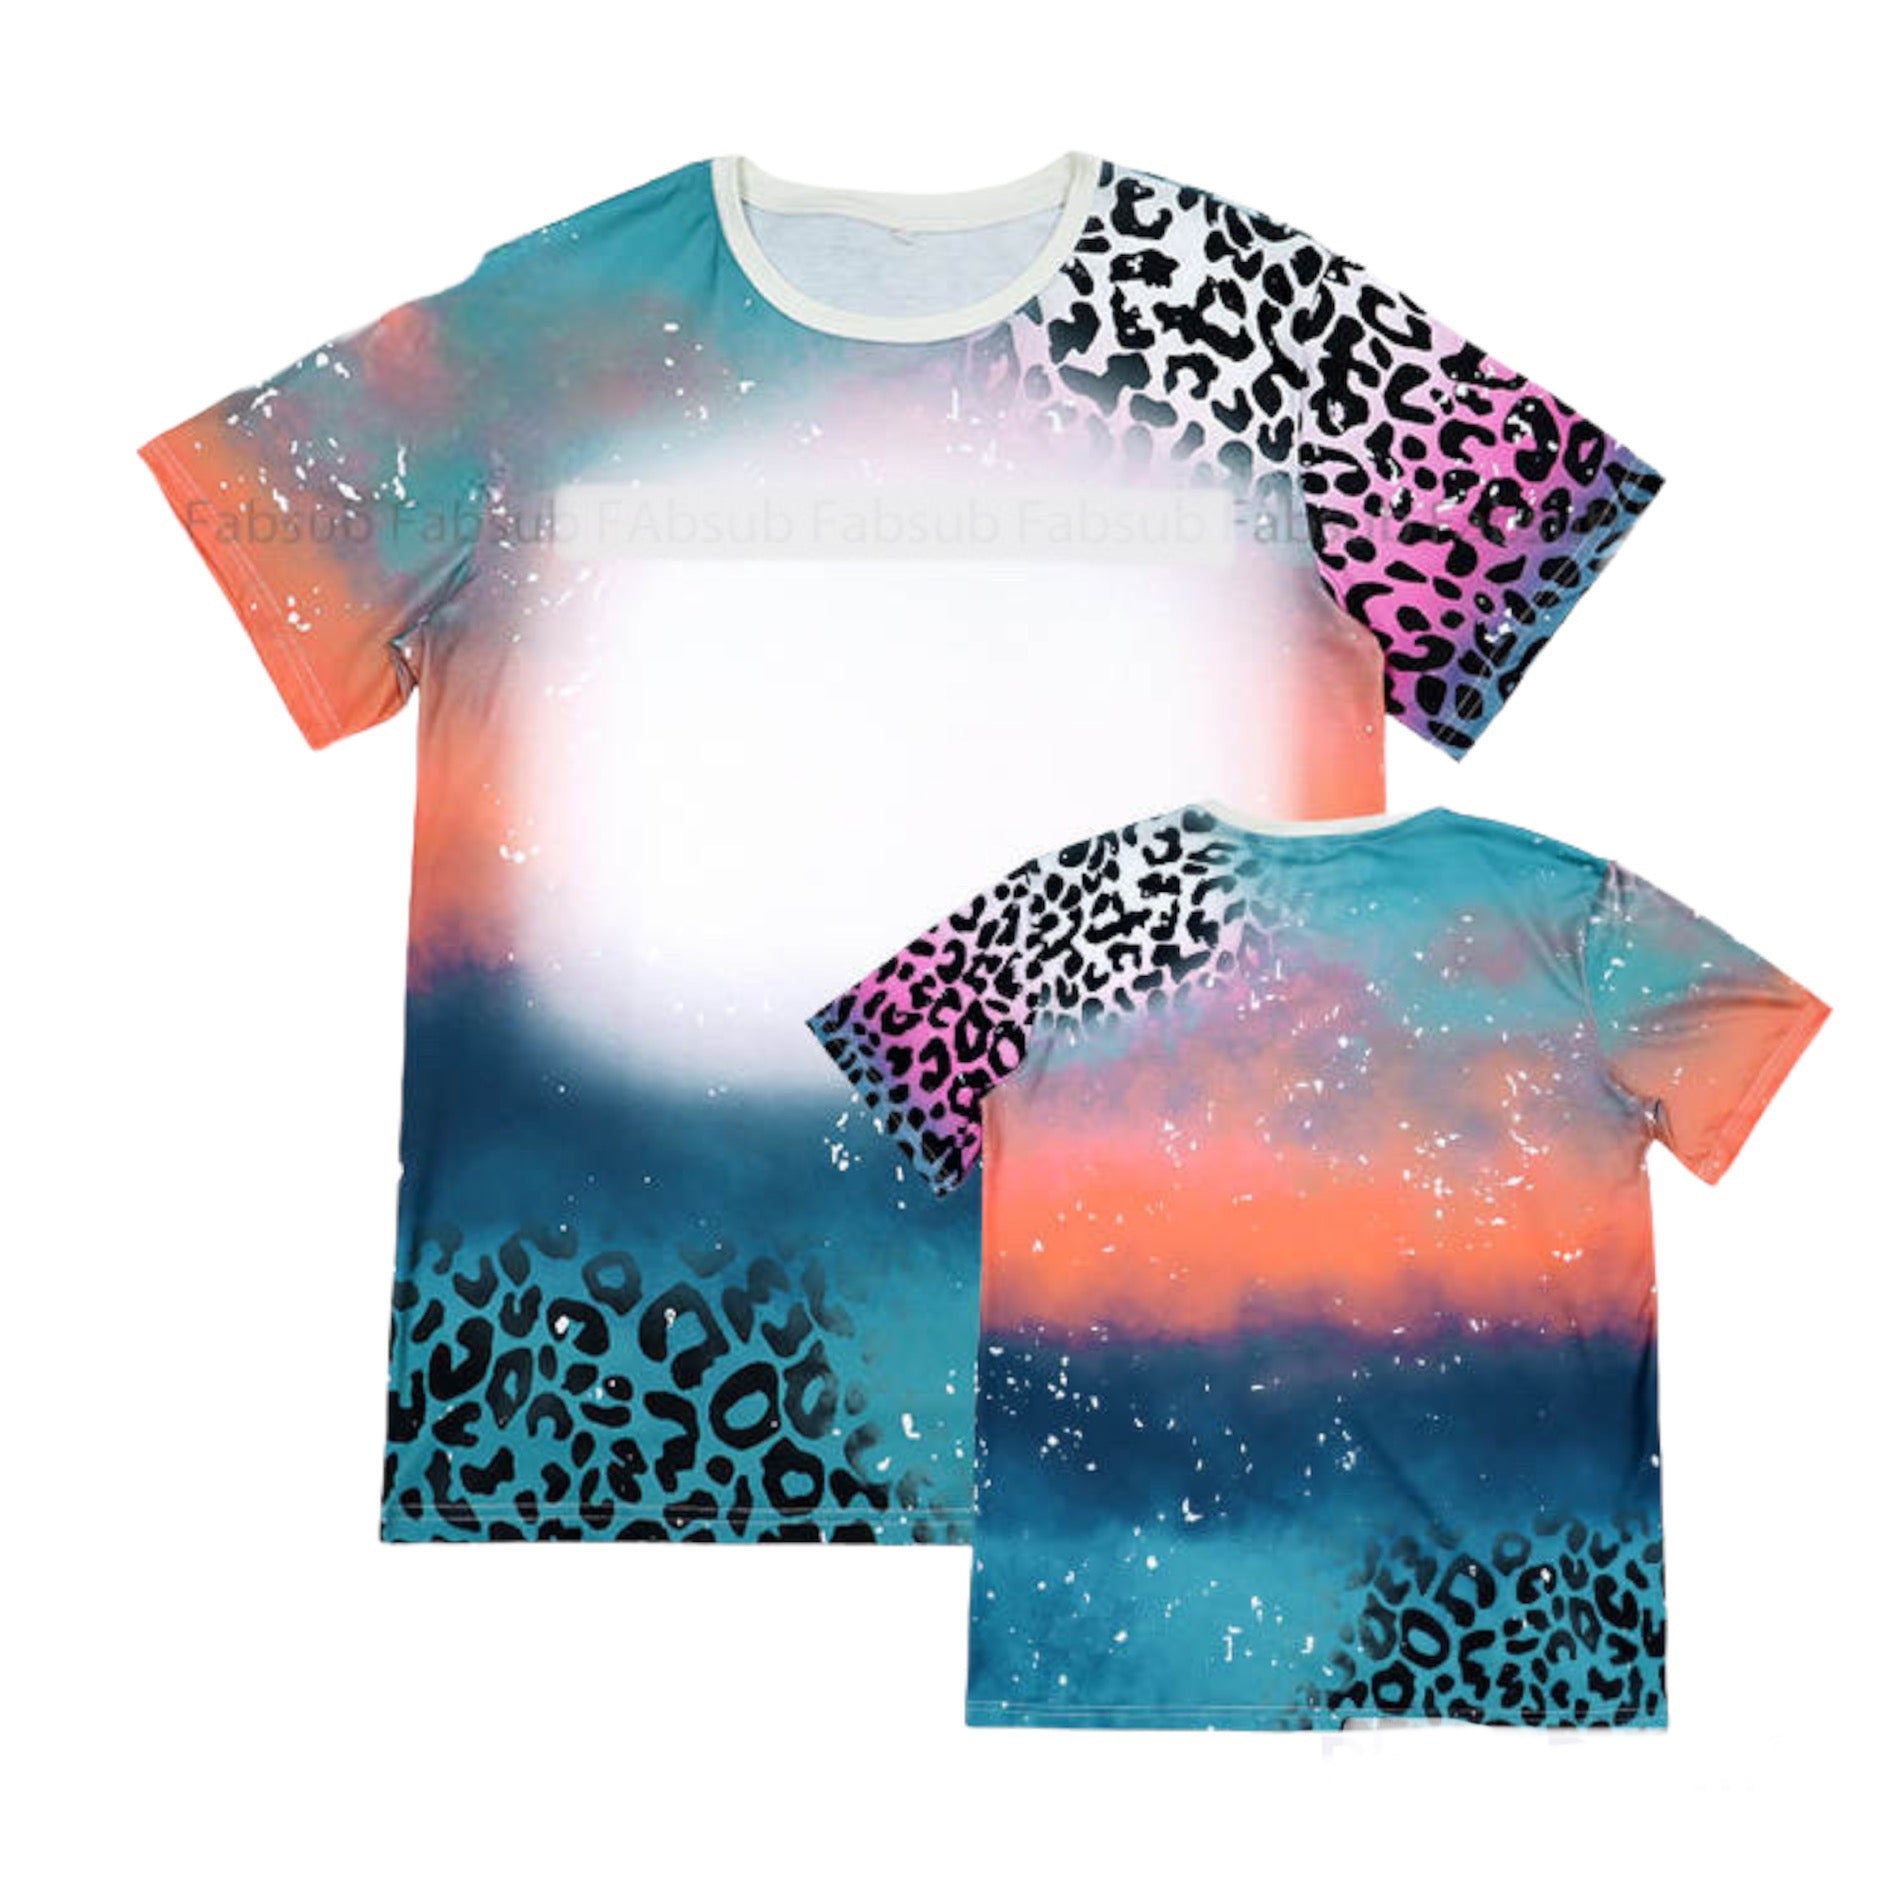 Kids Tie Dye Bleach 95% Polyester Sublimation T-Shirt – LAWSON SUPPLY